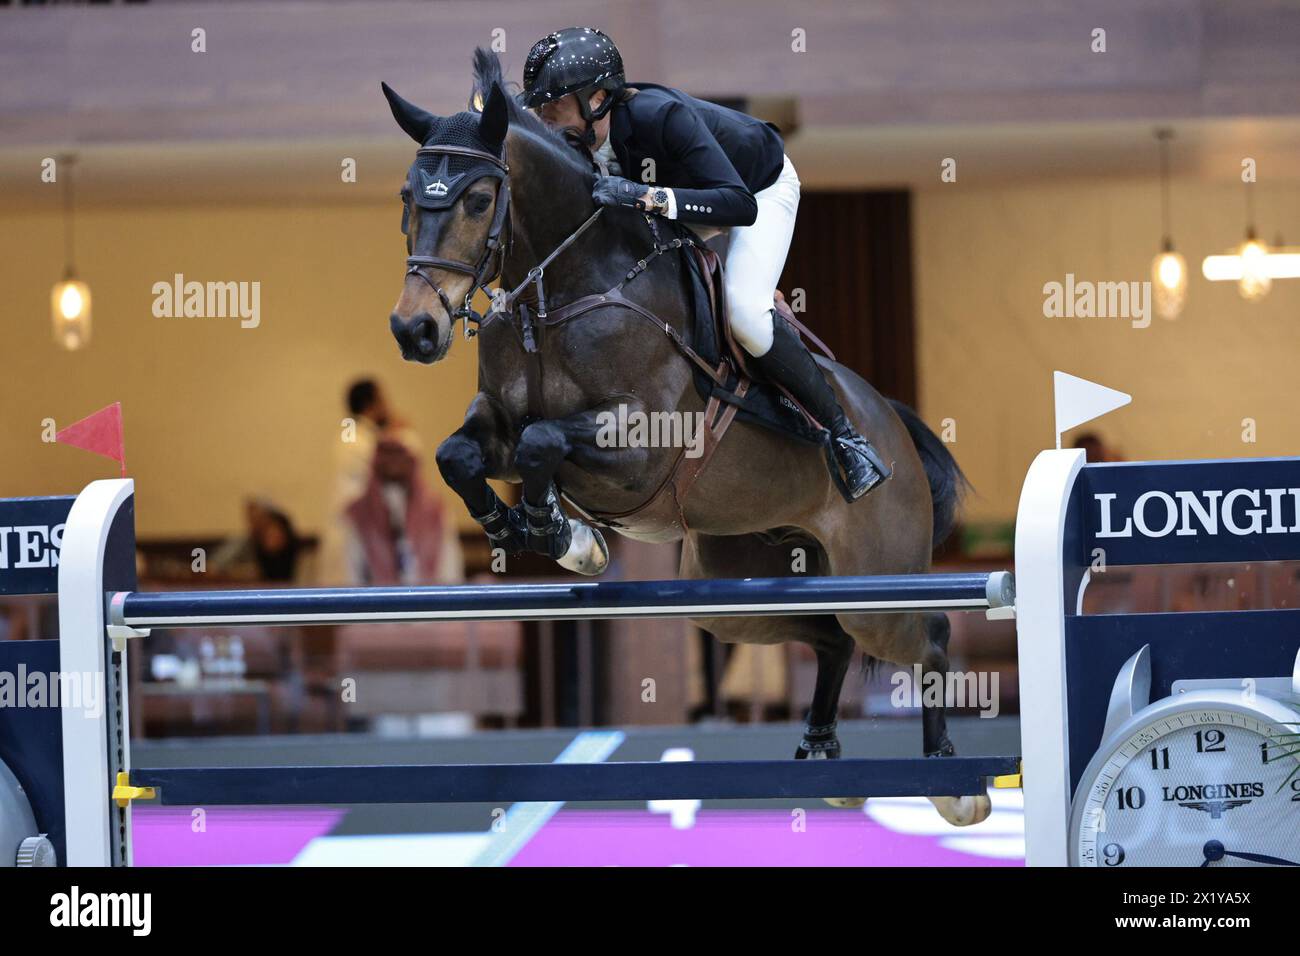 Martin Fuchs of Switzerland with Commissar Pezi during the Longines FEI Jumping World Cup™ - Final II at the FEI World Cup™ Finals Riyadh on April 18, 2024, Riyadh International Convention and Exhibition Center, Kingdom of Saudi Arabia (Photo by Maxime David - MXIMD Pictures) Stock Photo